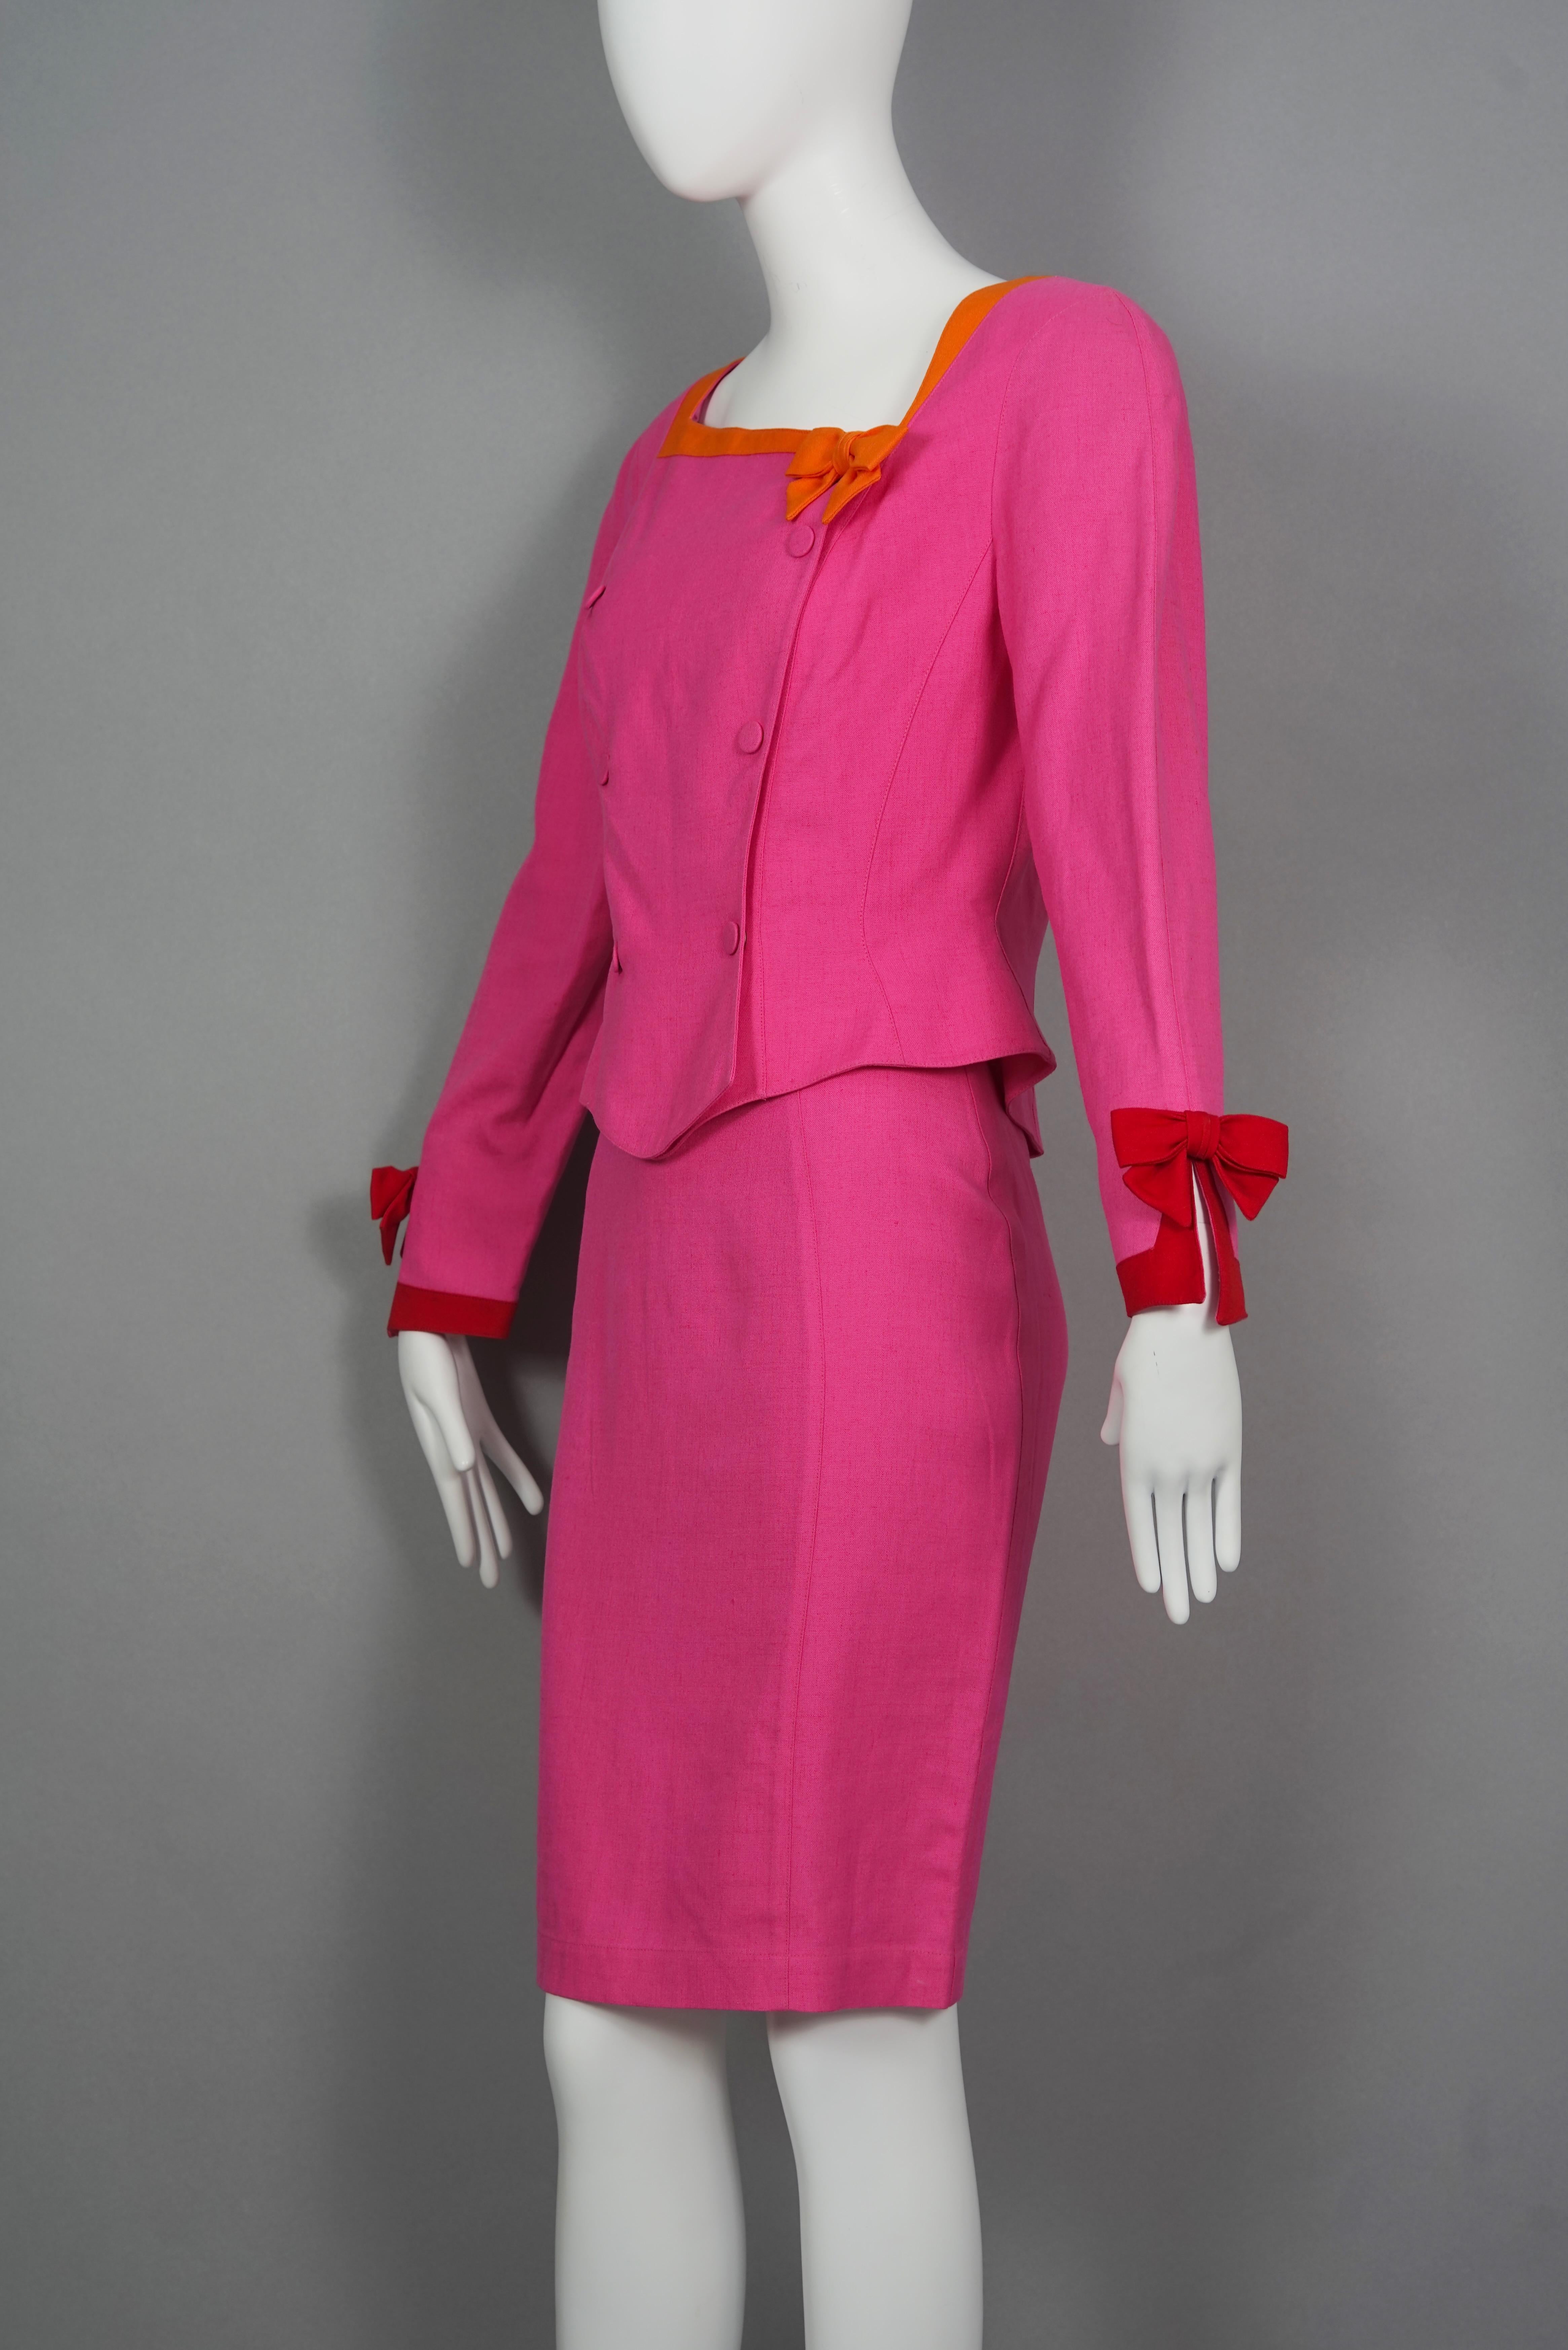 Vintage THIERRY MUGLER Colour Block Bows Blazer Skirt Suit In Excellent Condition For Sale In Kingersheim, Alsace